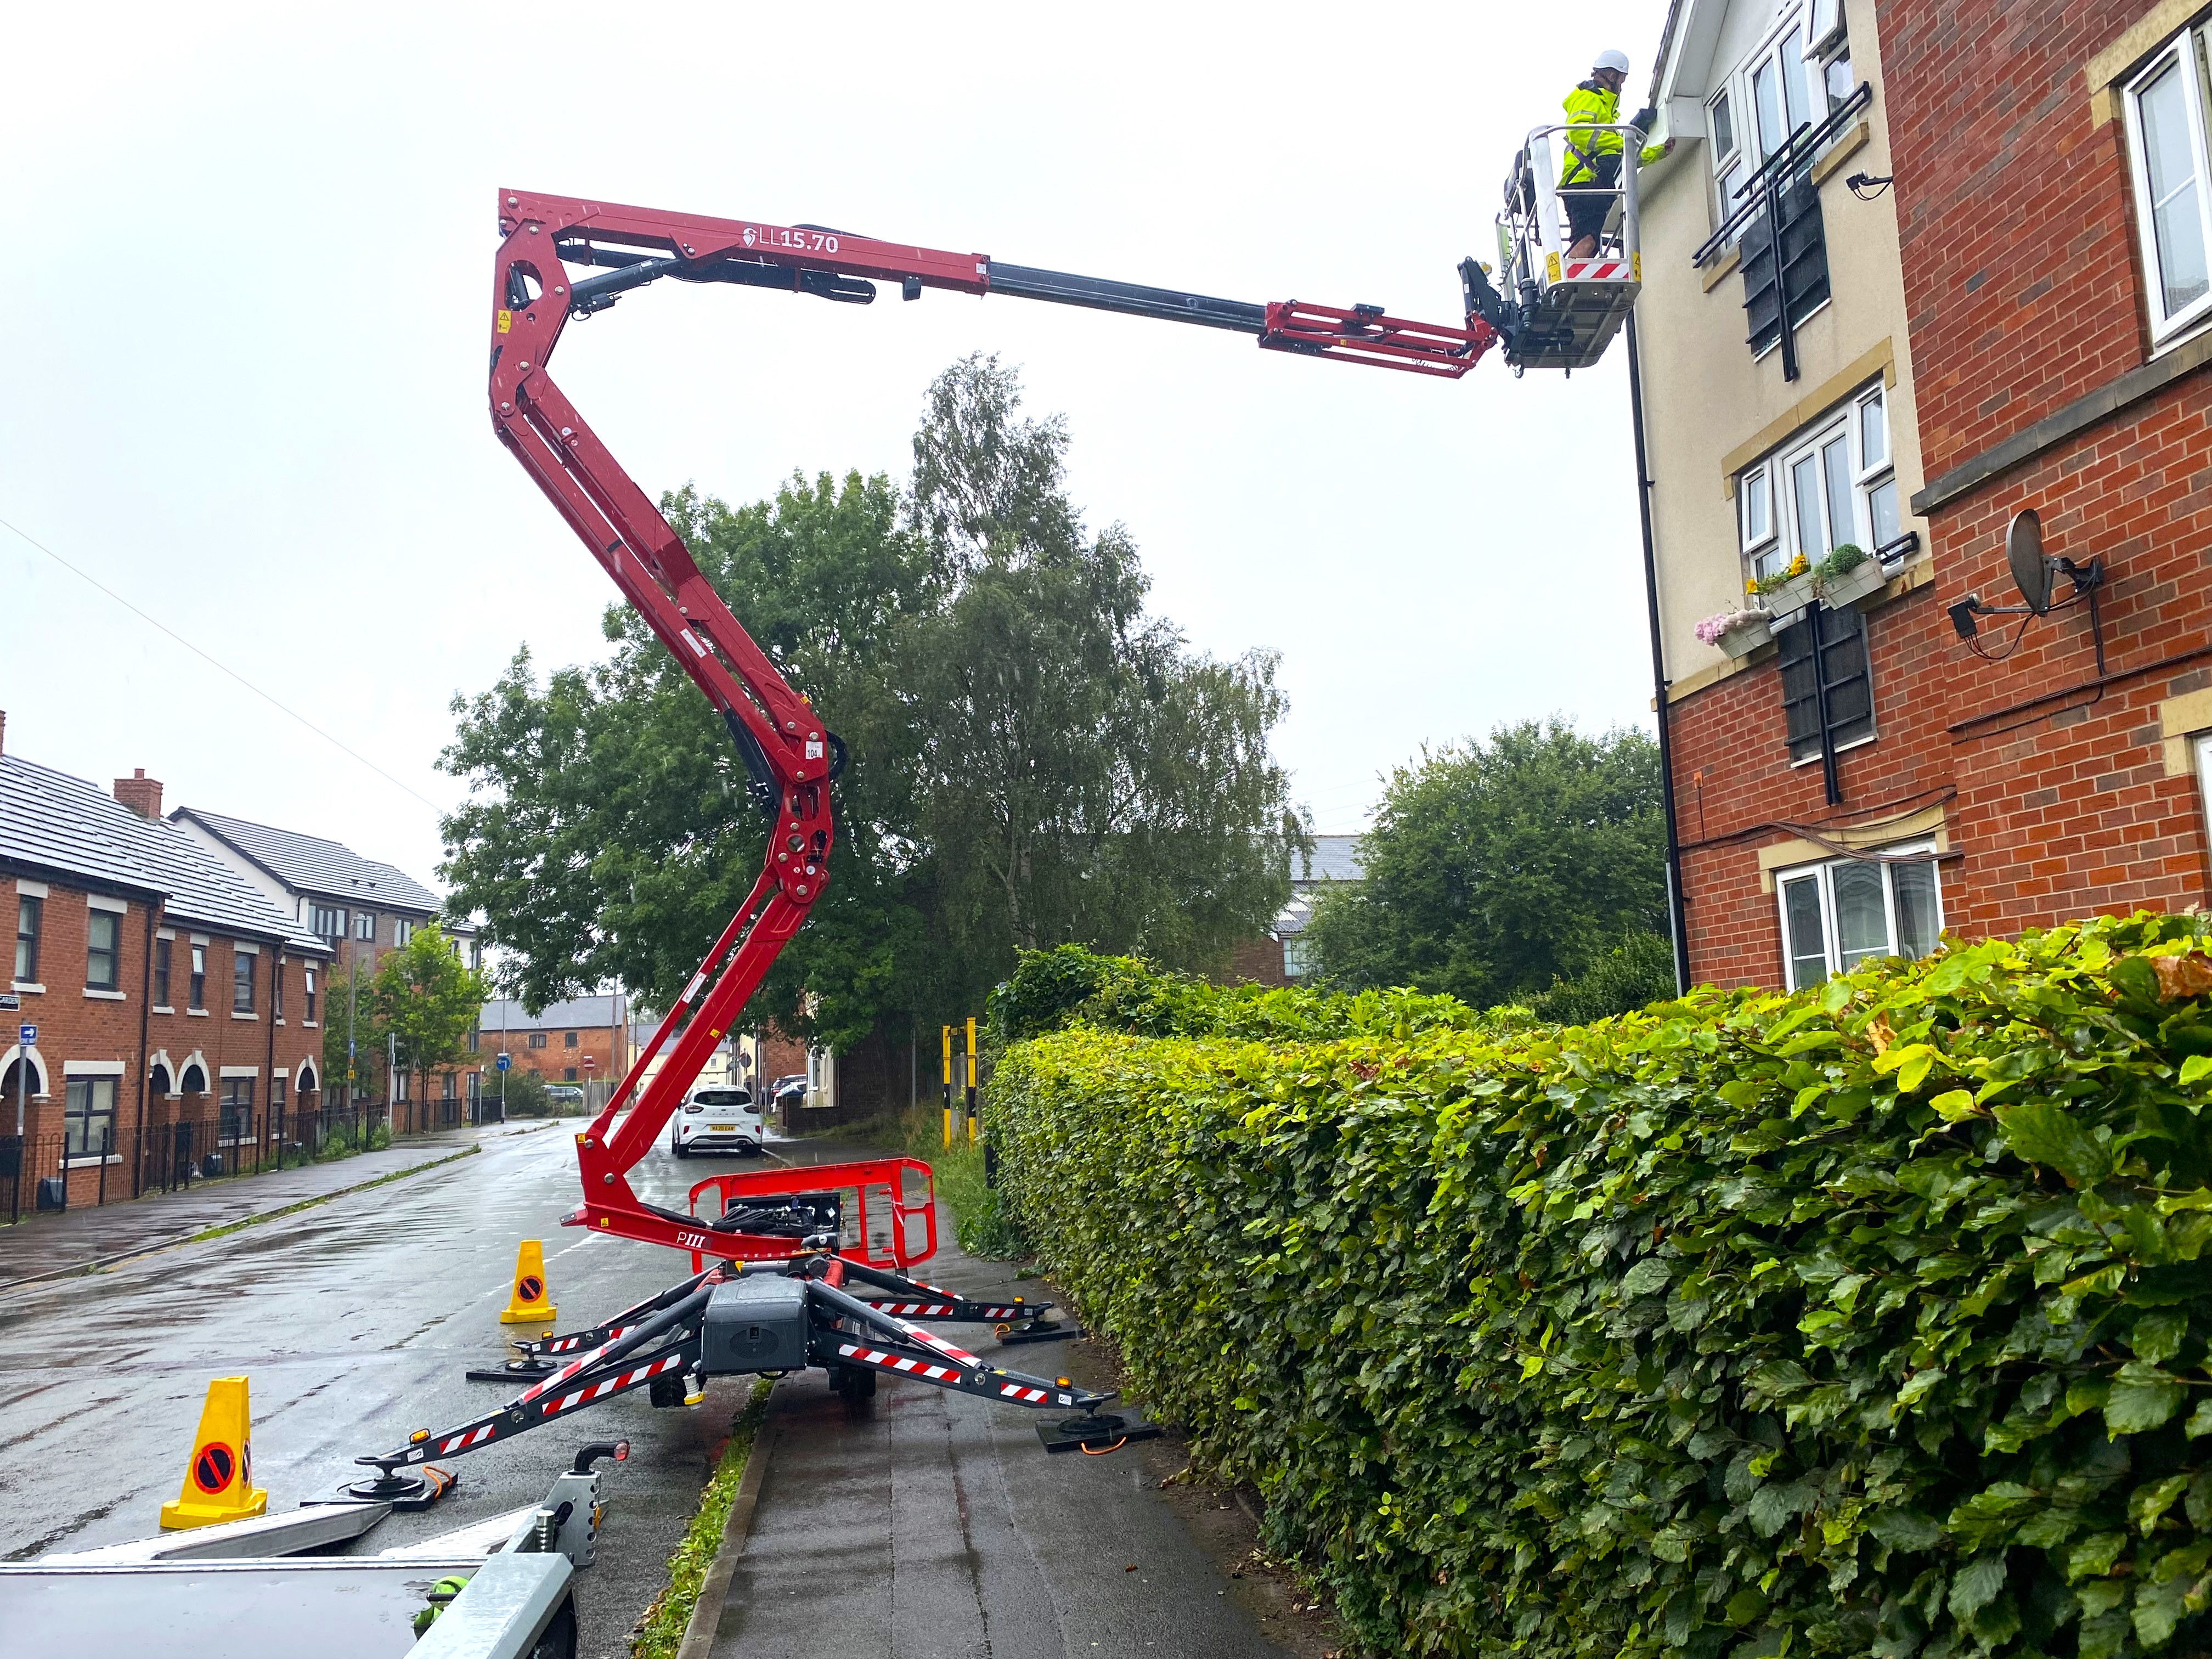 Spider lift investment ‘exceeding expectations’ – social landlord